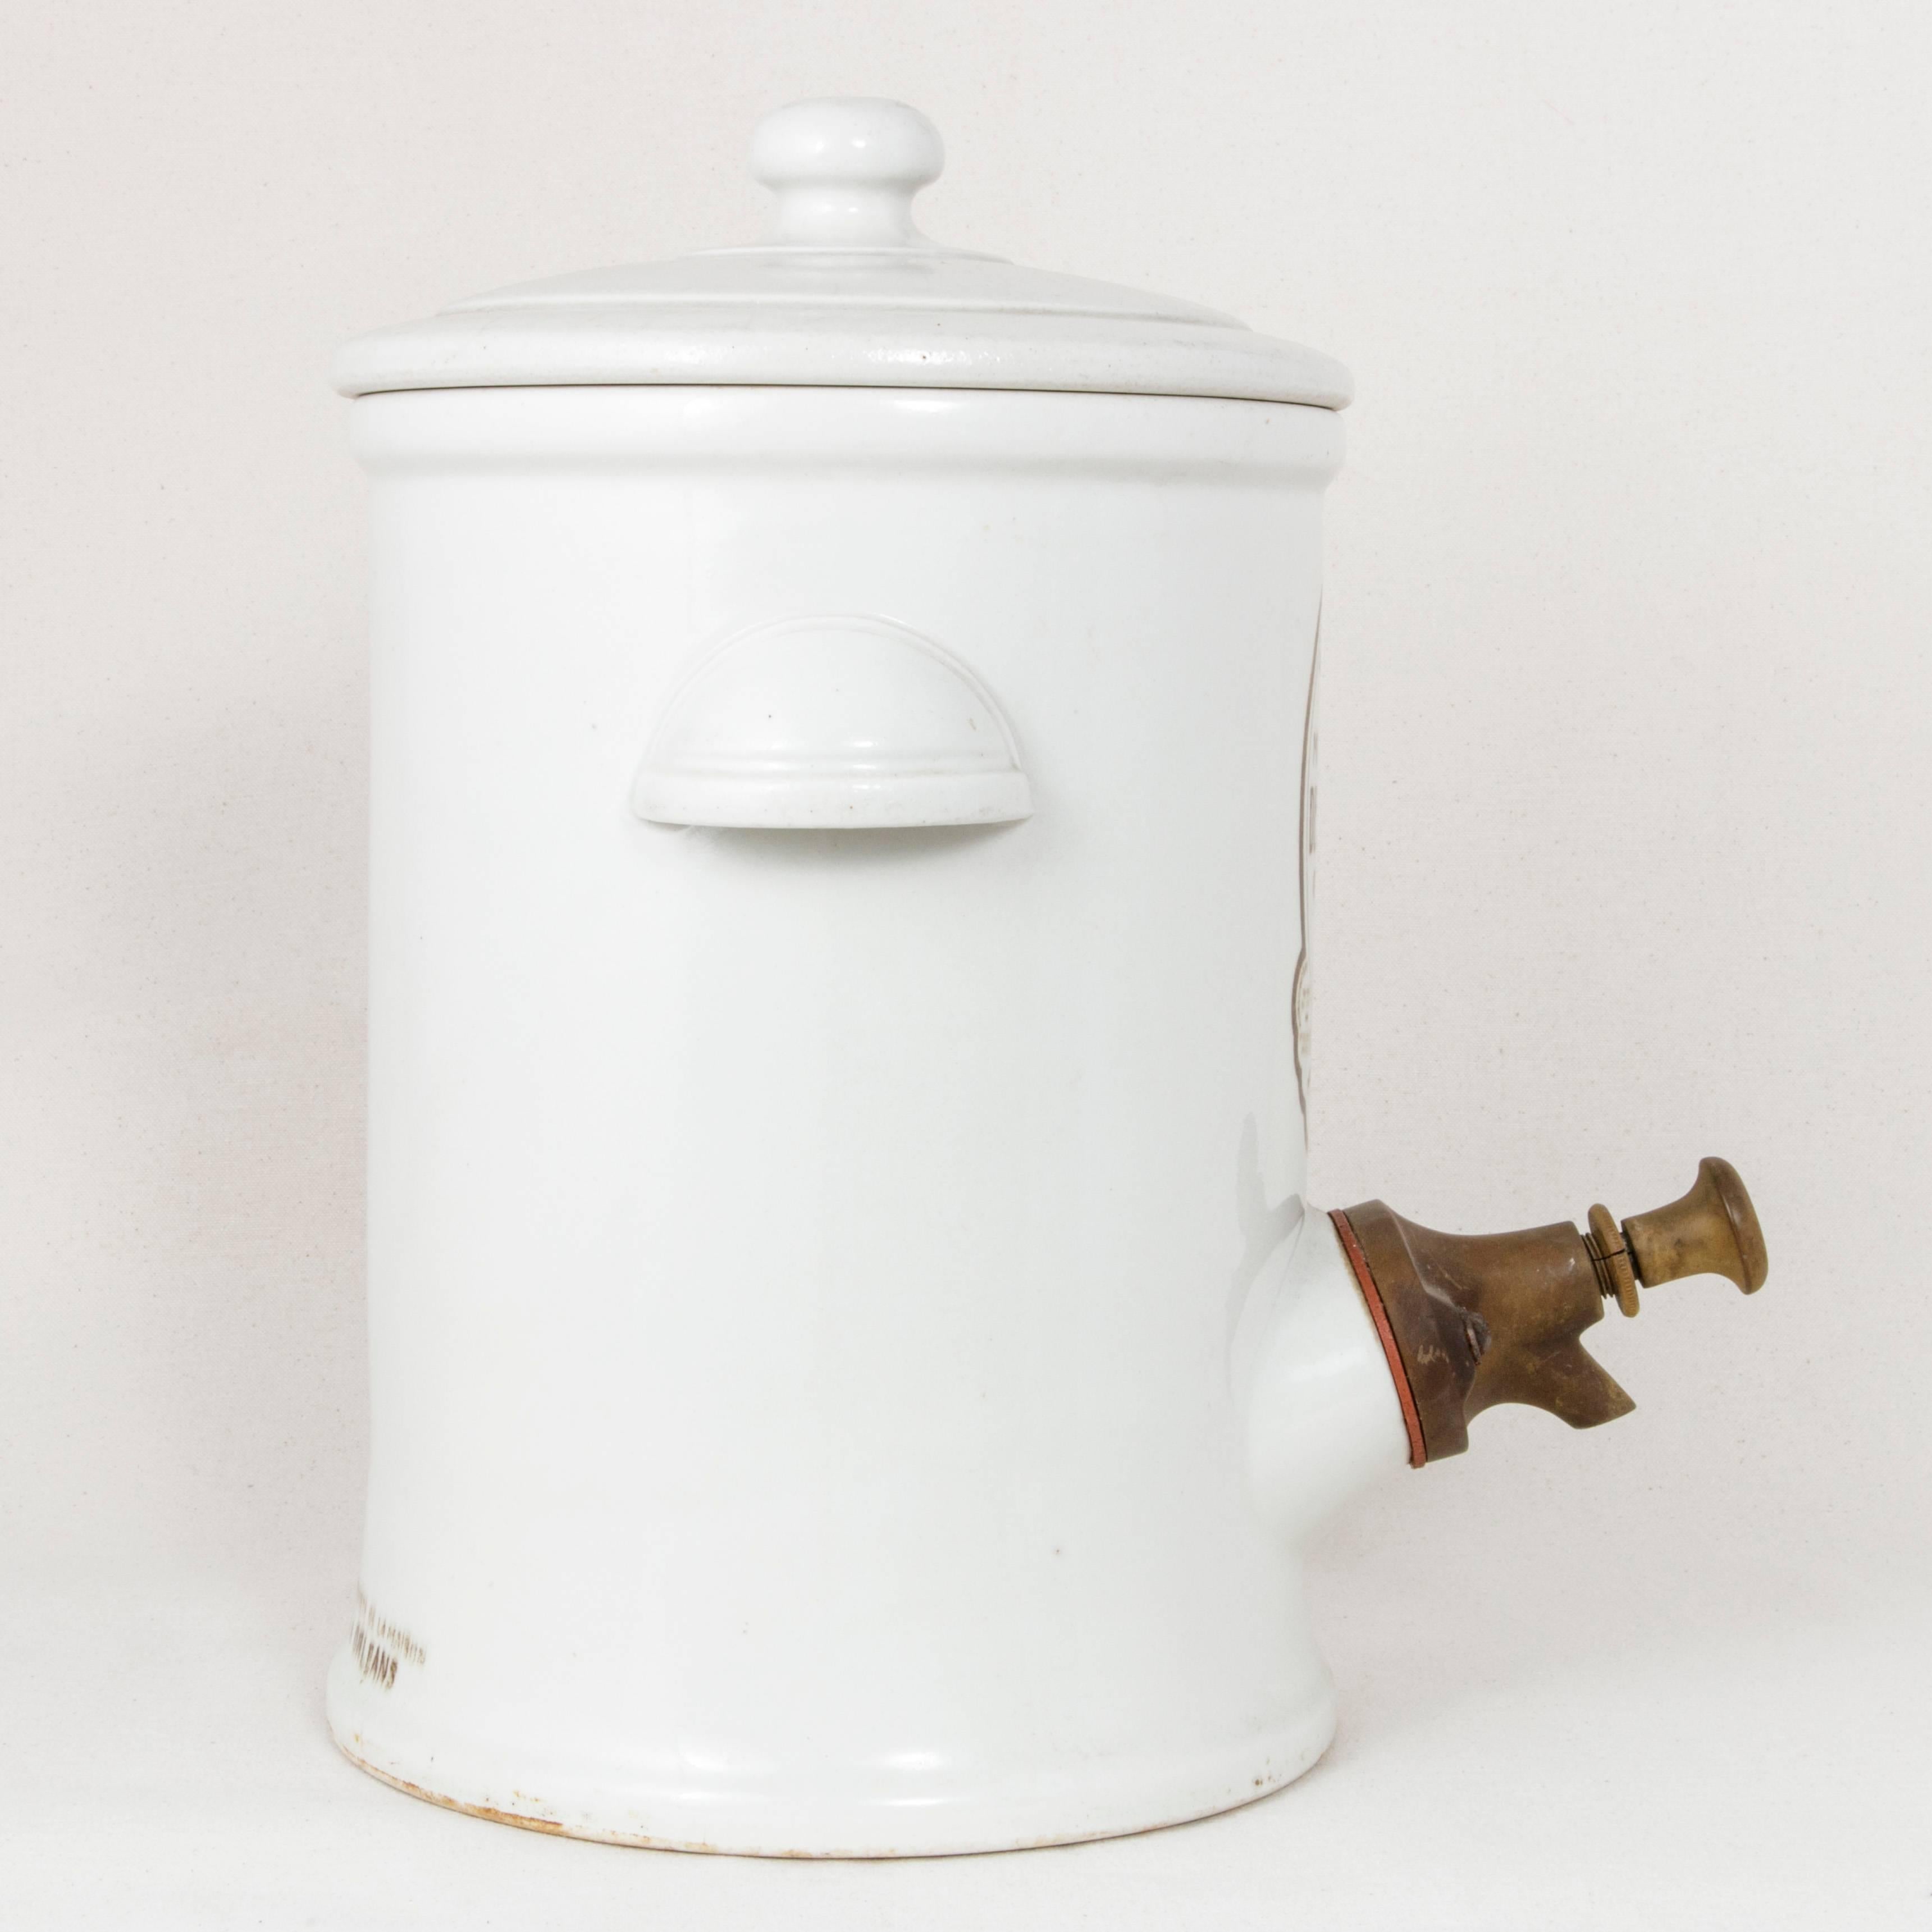 Large Early 20th Century Faience Mustard Pot or Dispenser Marked Dessaux Fils 1